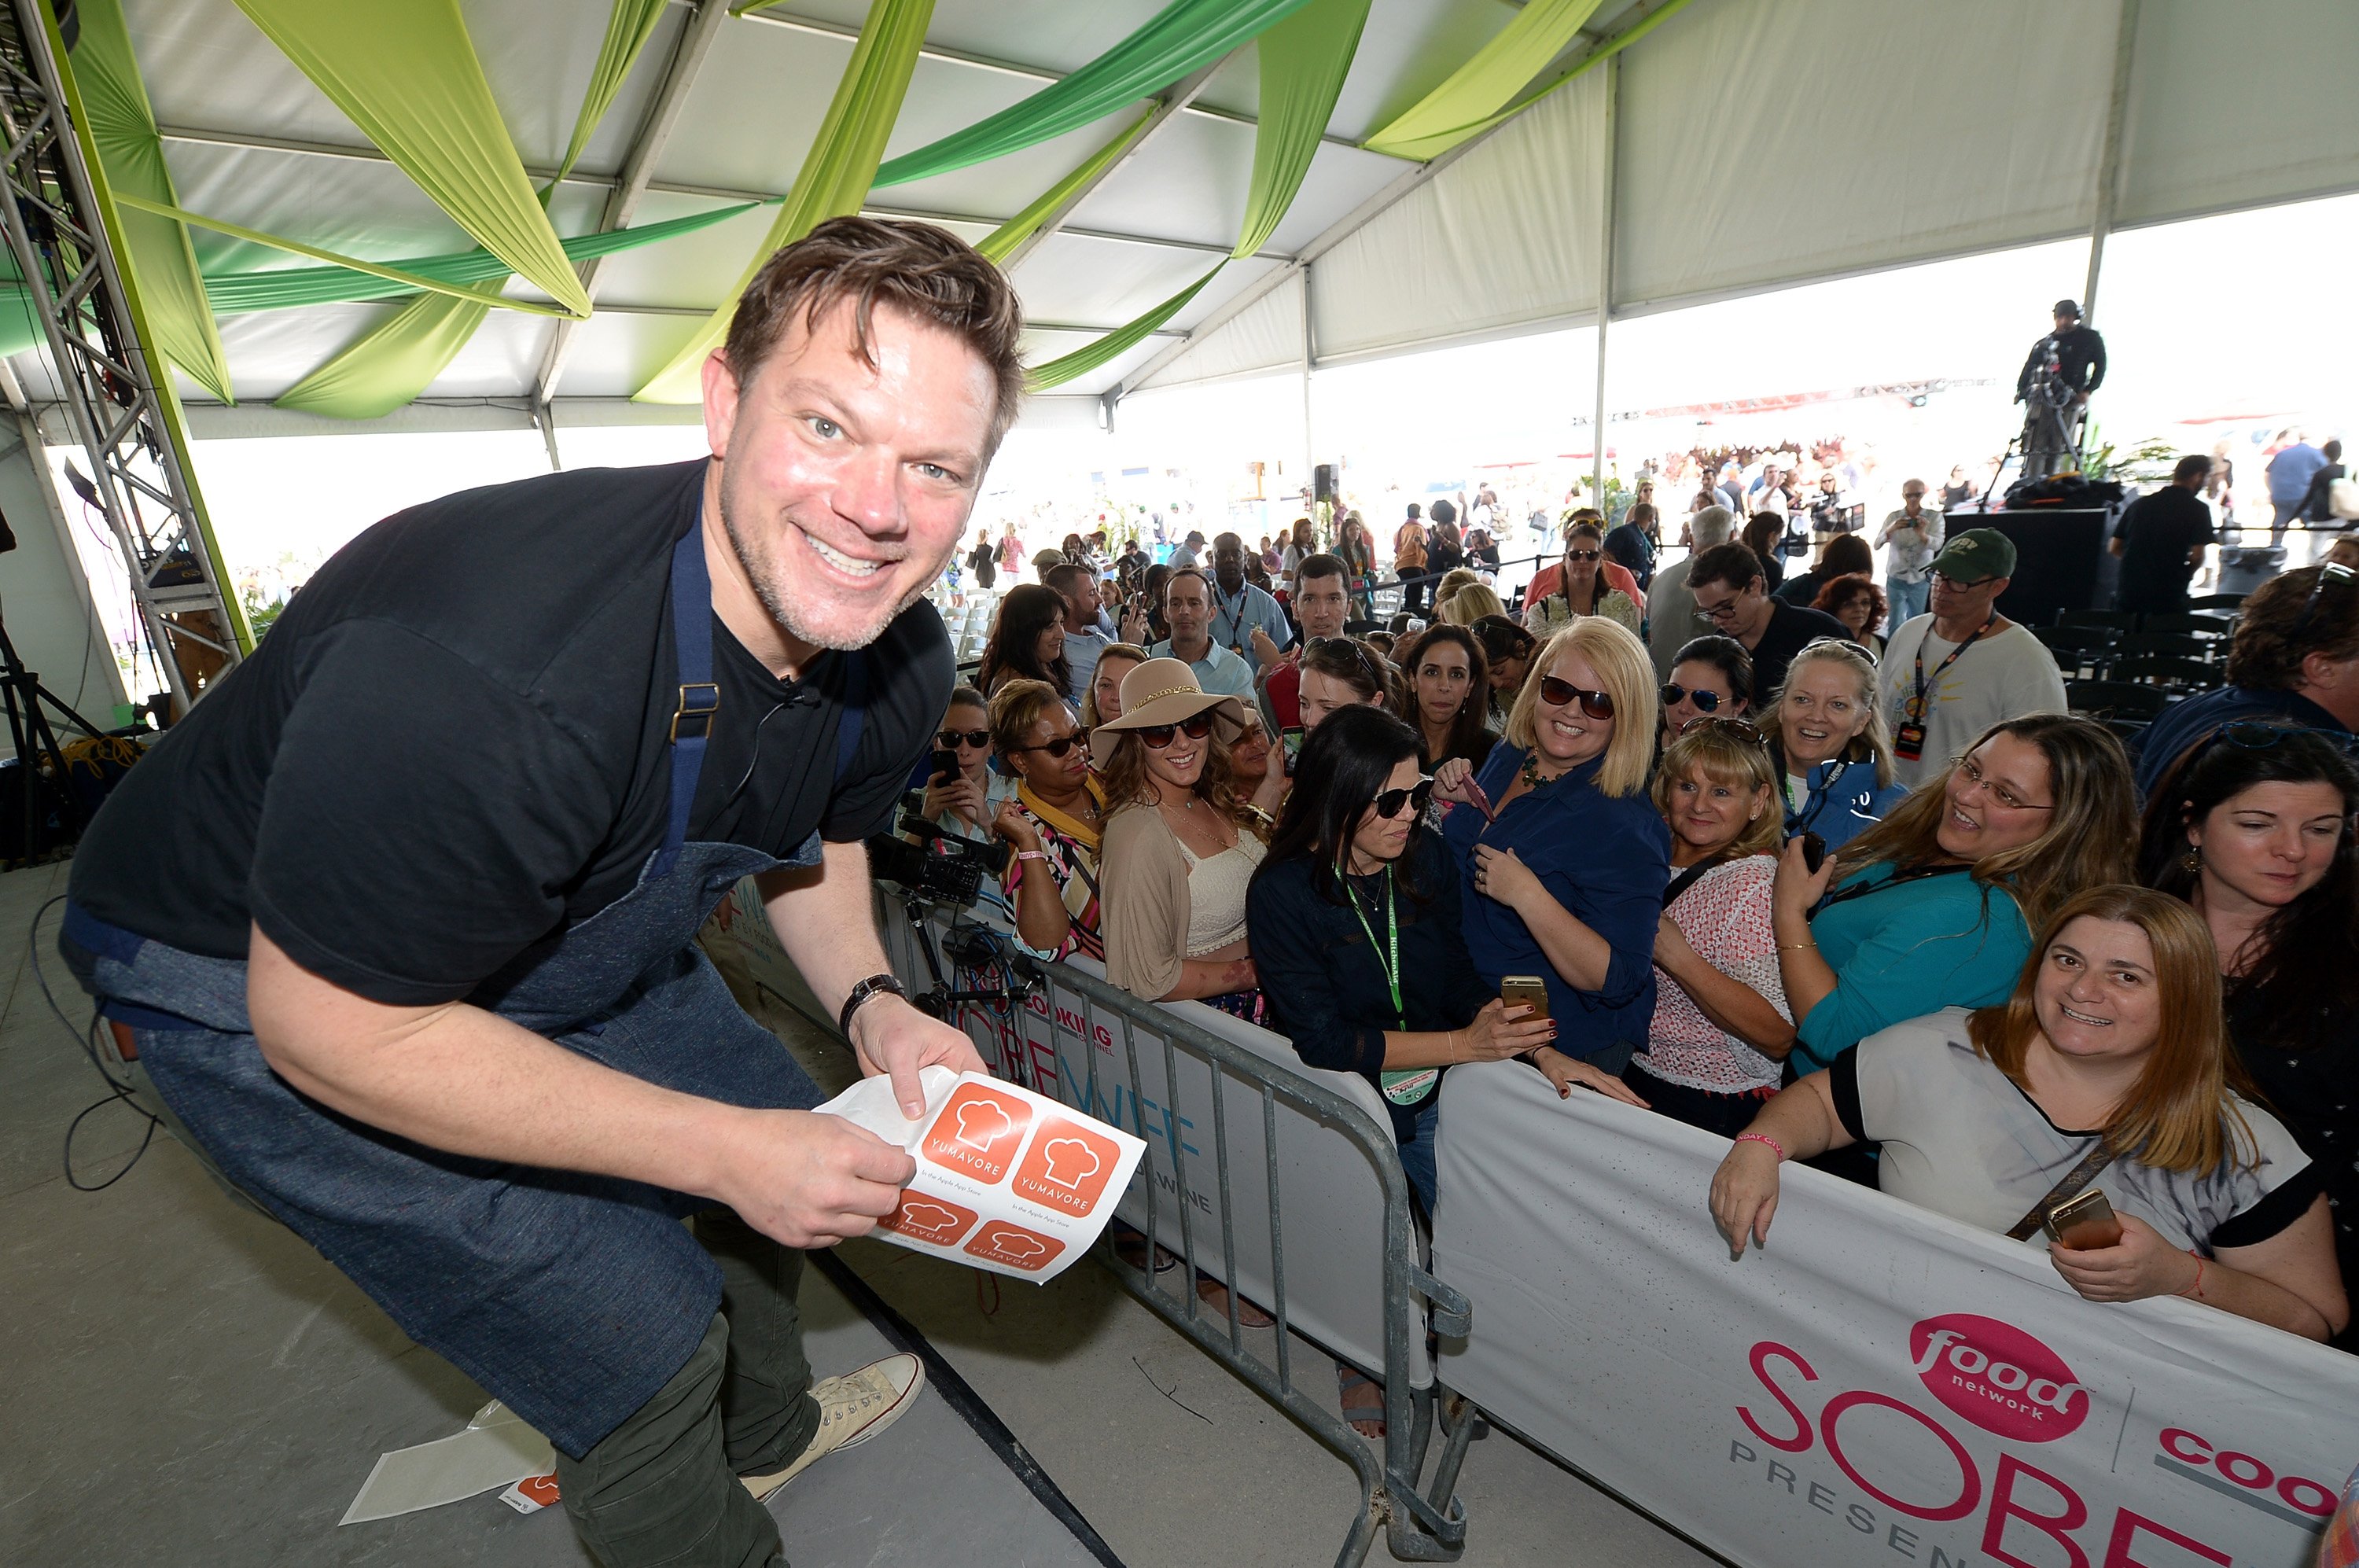 Food Network chef and host Tyler Florence greets fans at a 2016 Food Network event